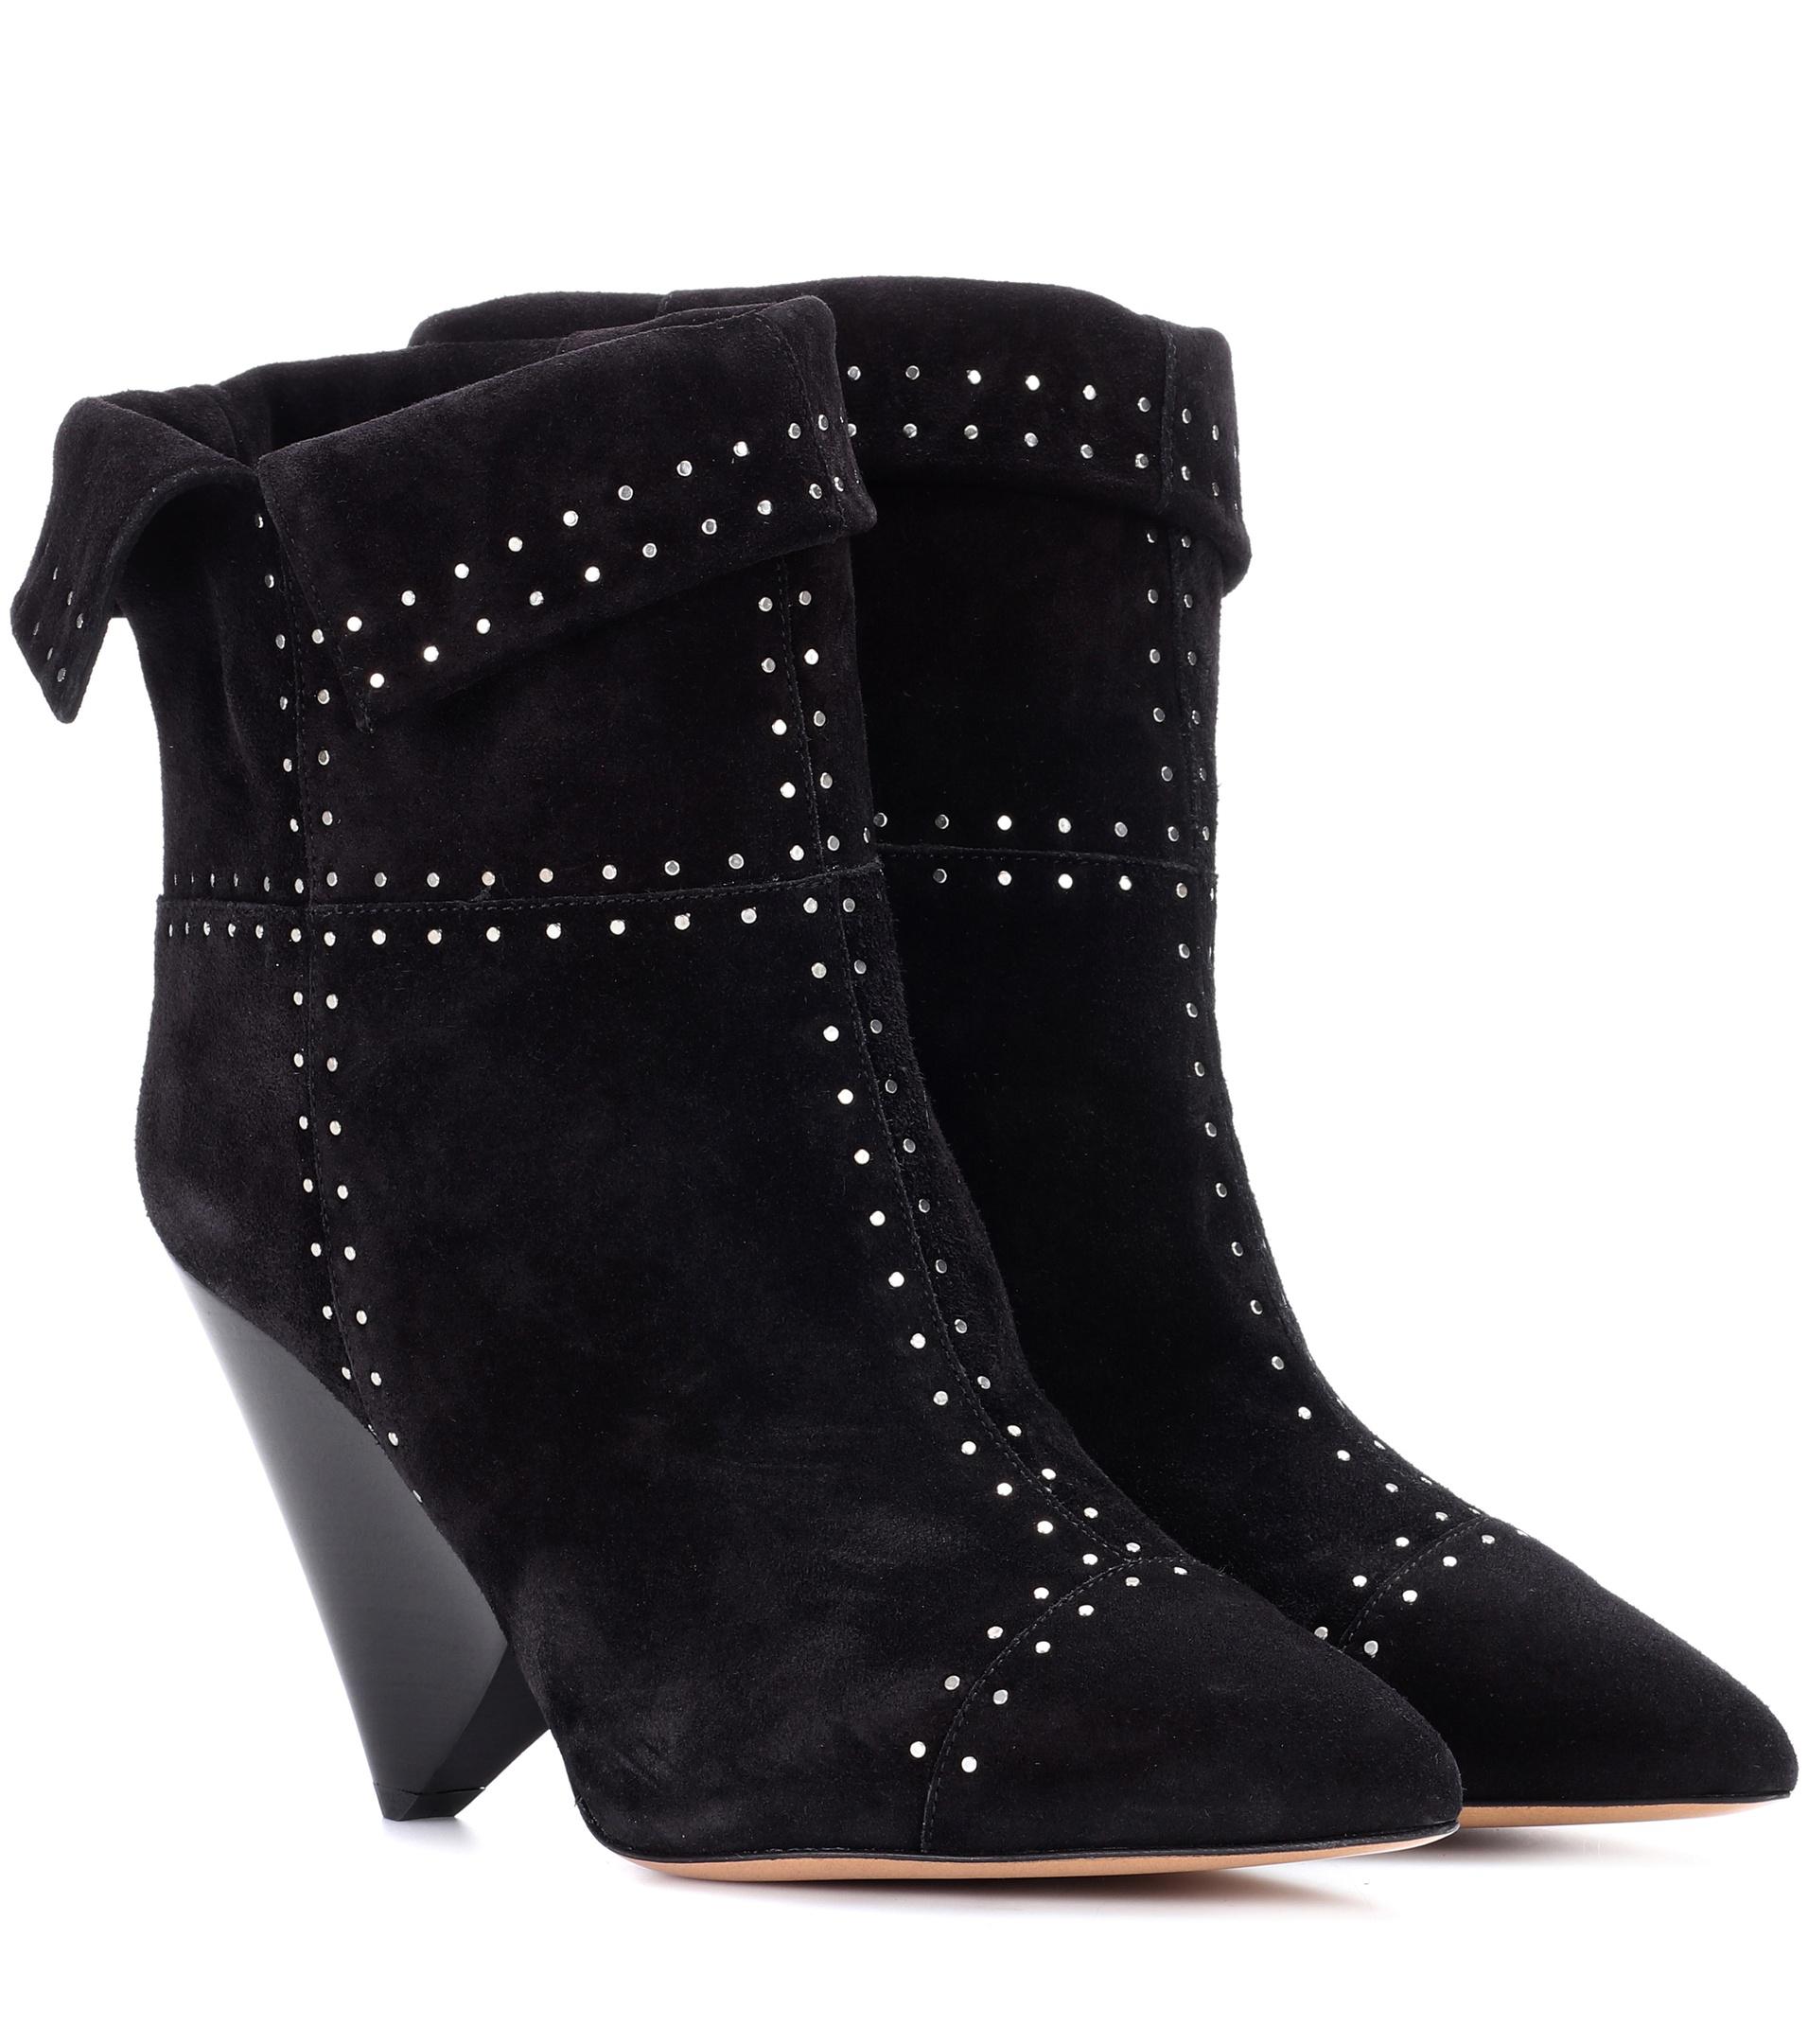 Lyst - Isabel Marant Lizynn Studded Suede Ankle Boots in Black